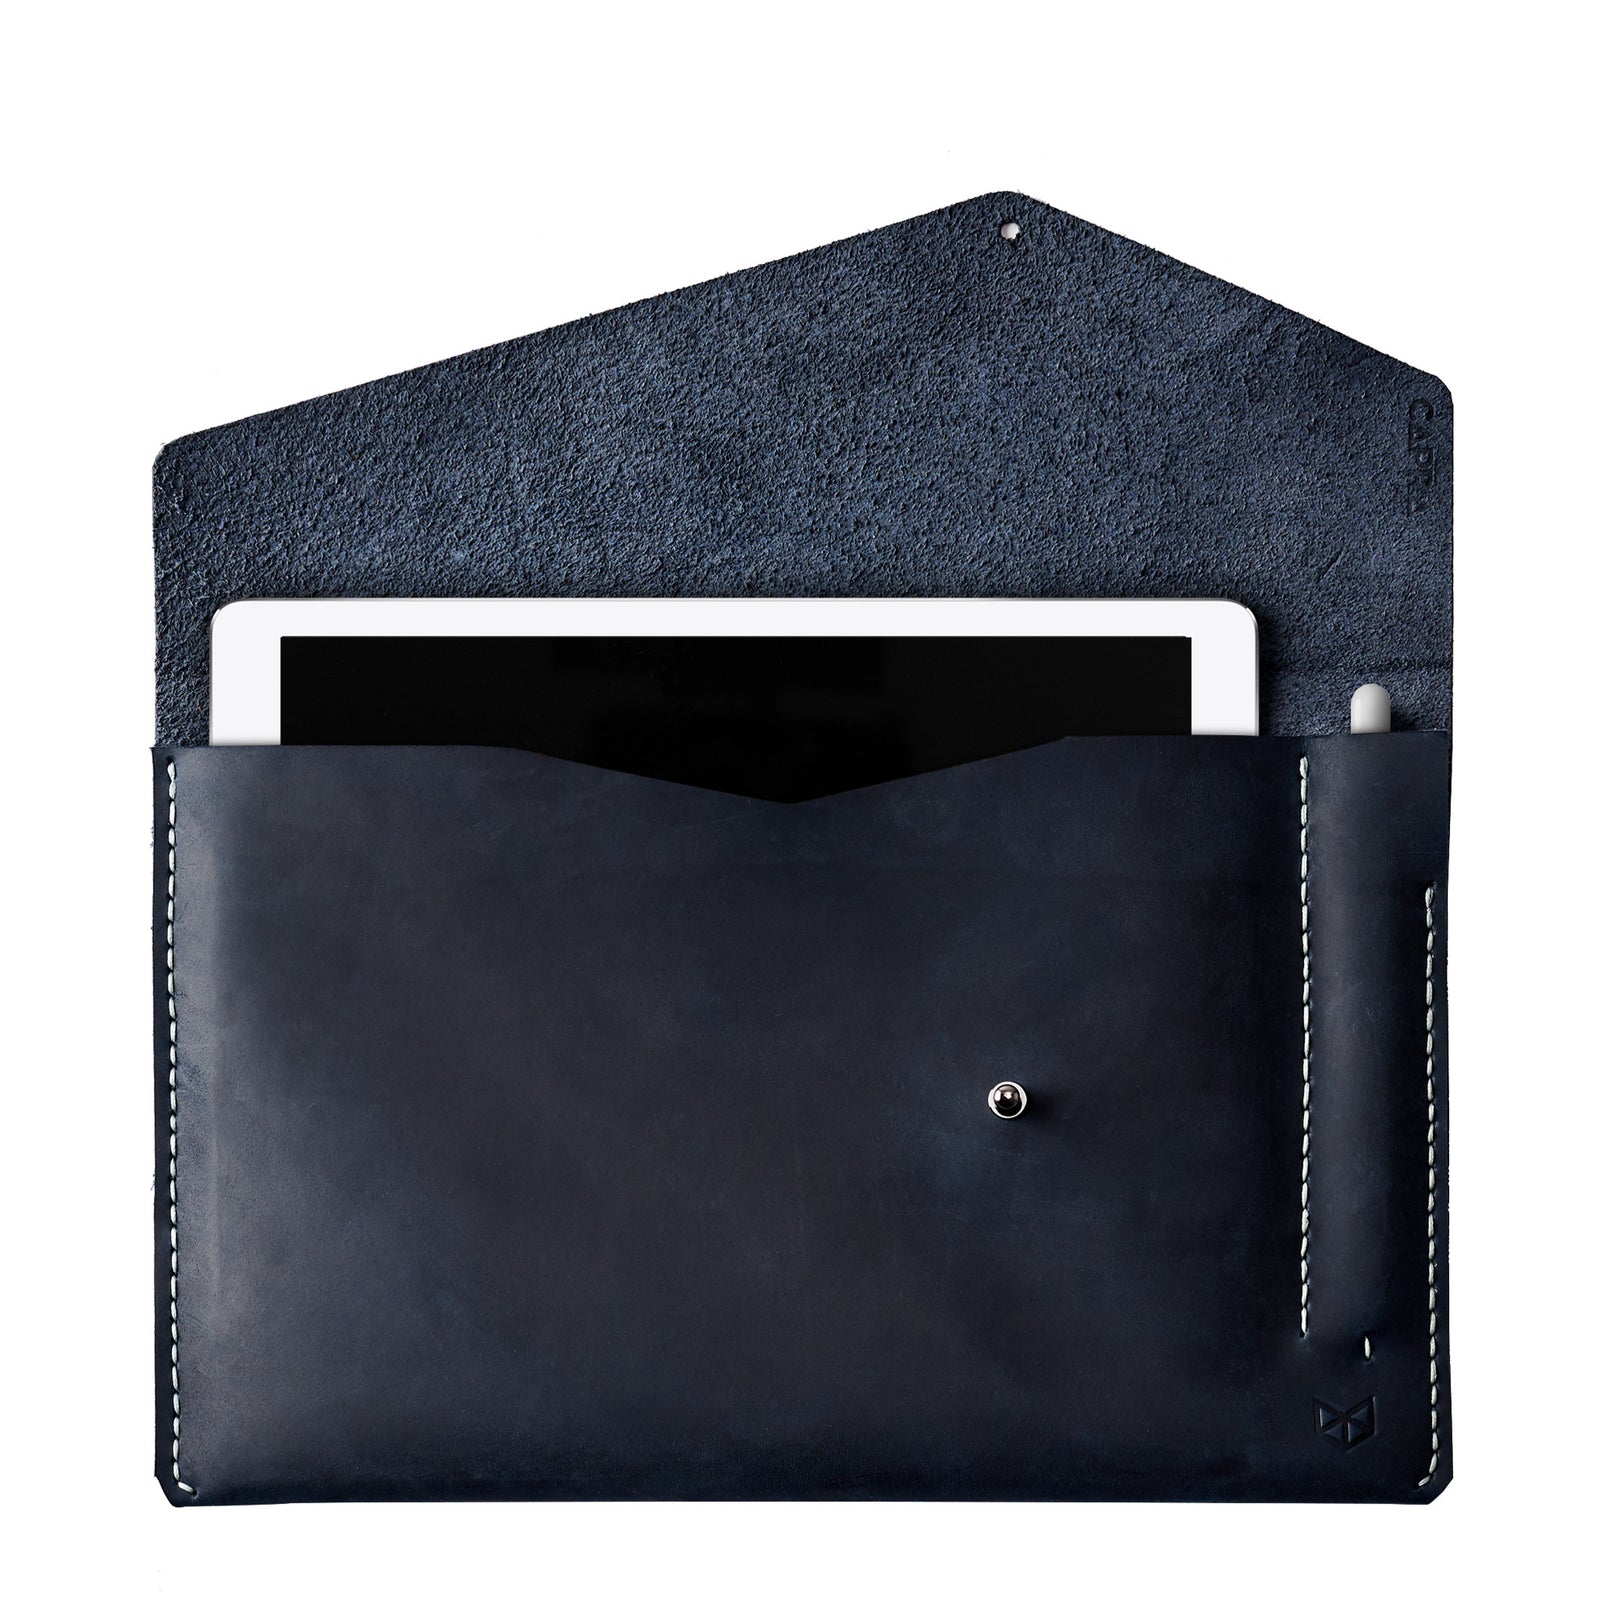 Blue leather sleeve for ASUS Zenbook Pro Duo. Mens gifts